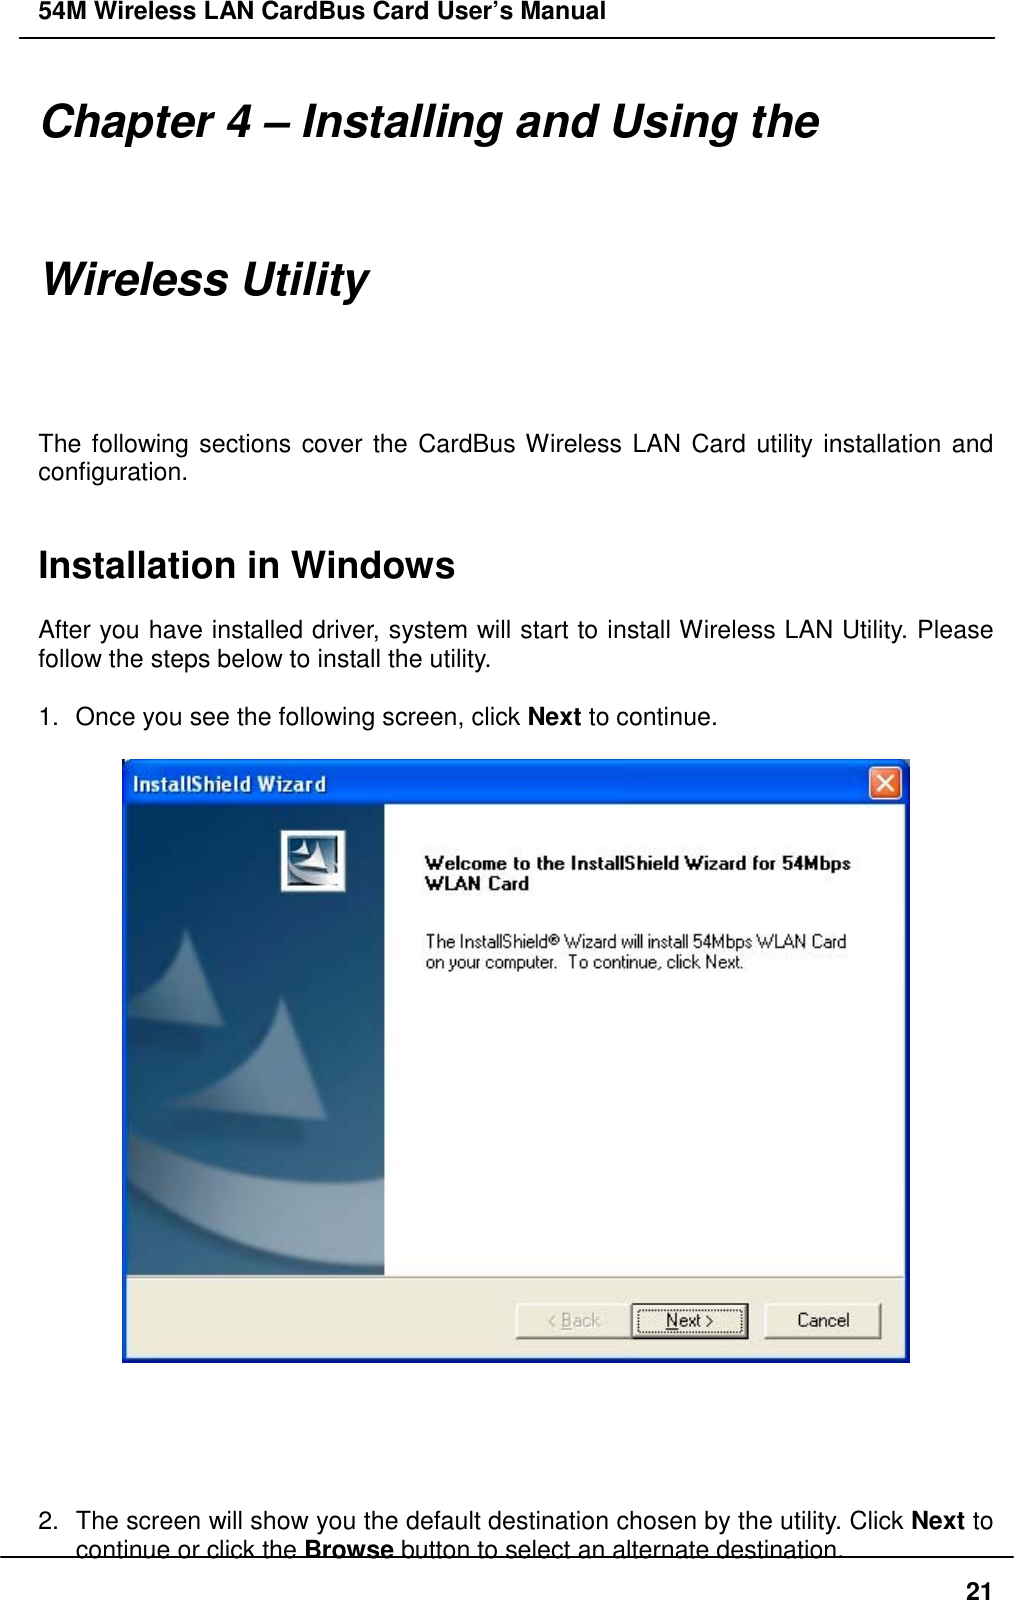 54M Wireless LAN CardBus Card User’s Manual21Chapter 4 – Installing and Using theWireless UtilityThe following sections cover the CardBus Wireless LAN Card utility installation andconfiguration.Installation in WindowsAfter you have installed driver, system will start to install Wireless LAN Utility. Pleasefollow the steps below to install the utility.1.  Once you see the following screen, click Next to continue.2.  The screen will show you the default destination chosen by the utility. Click Next tocontinue or click the Browse button to select an alternate destination.